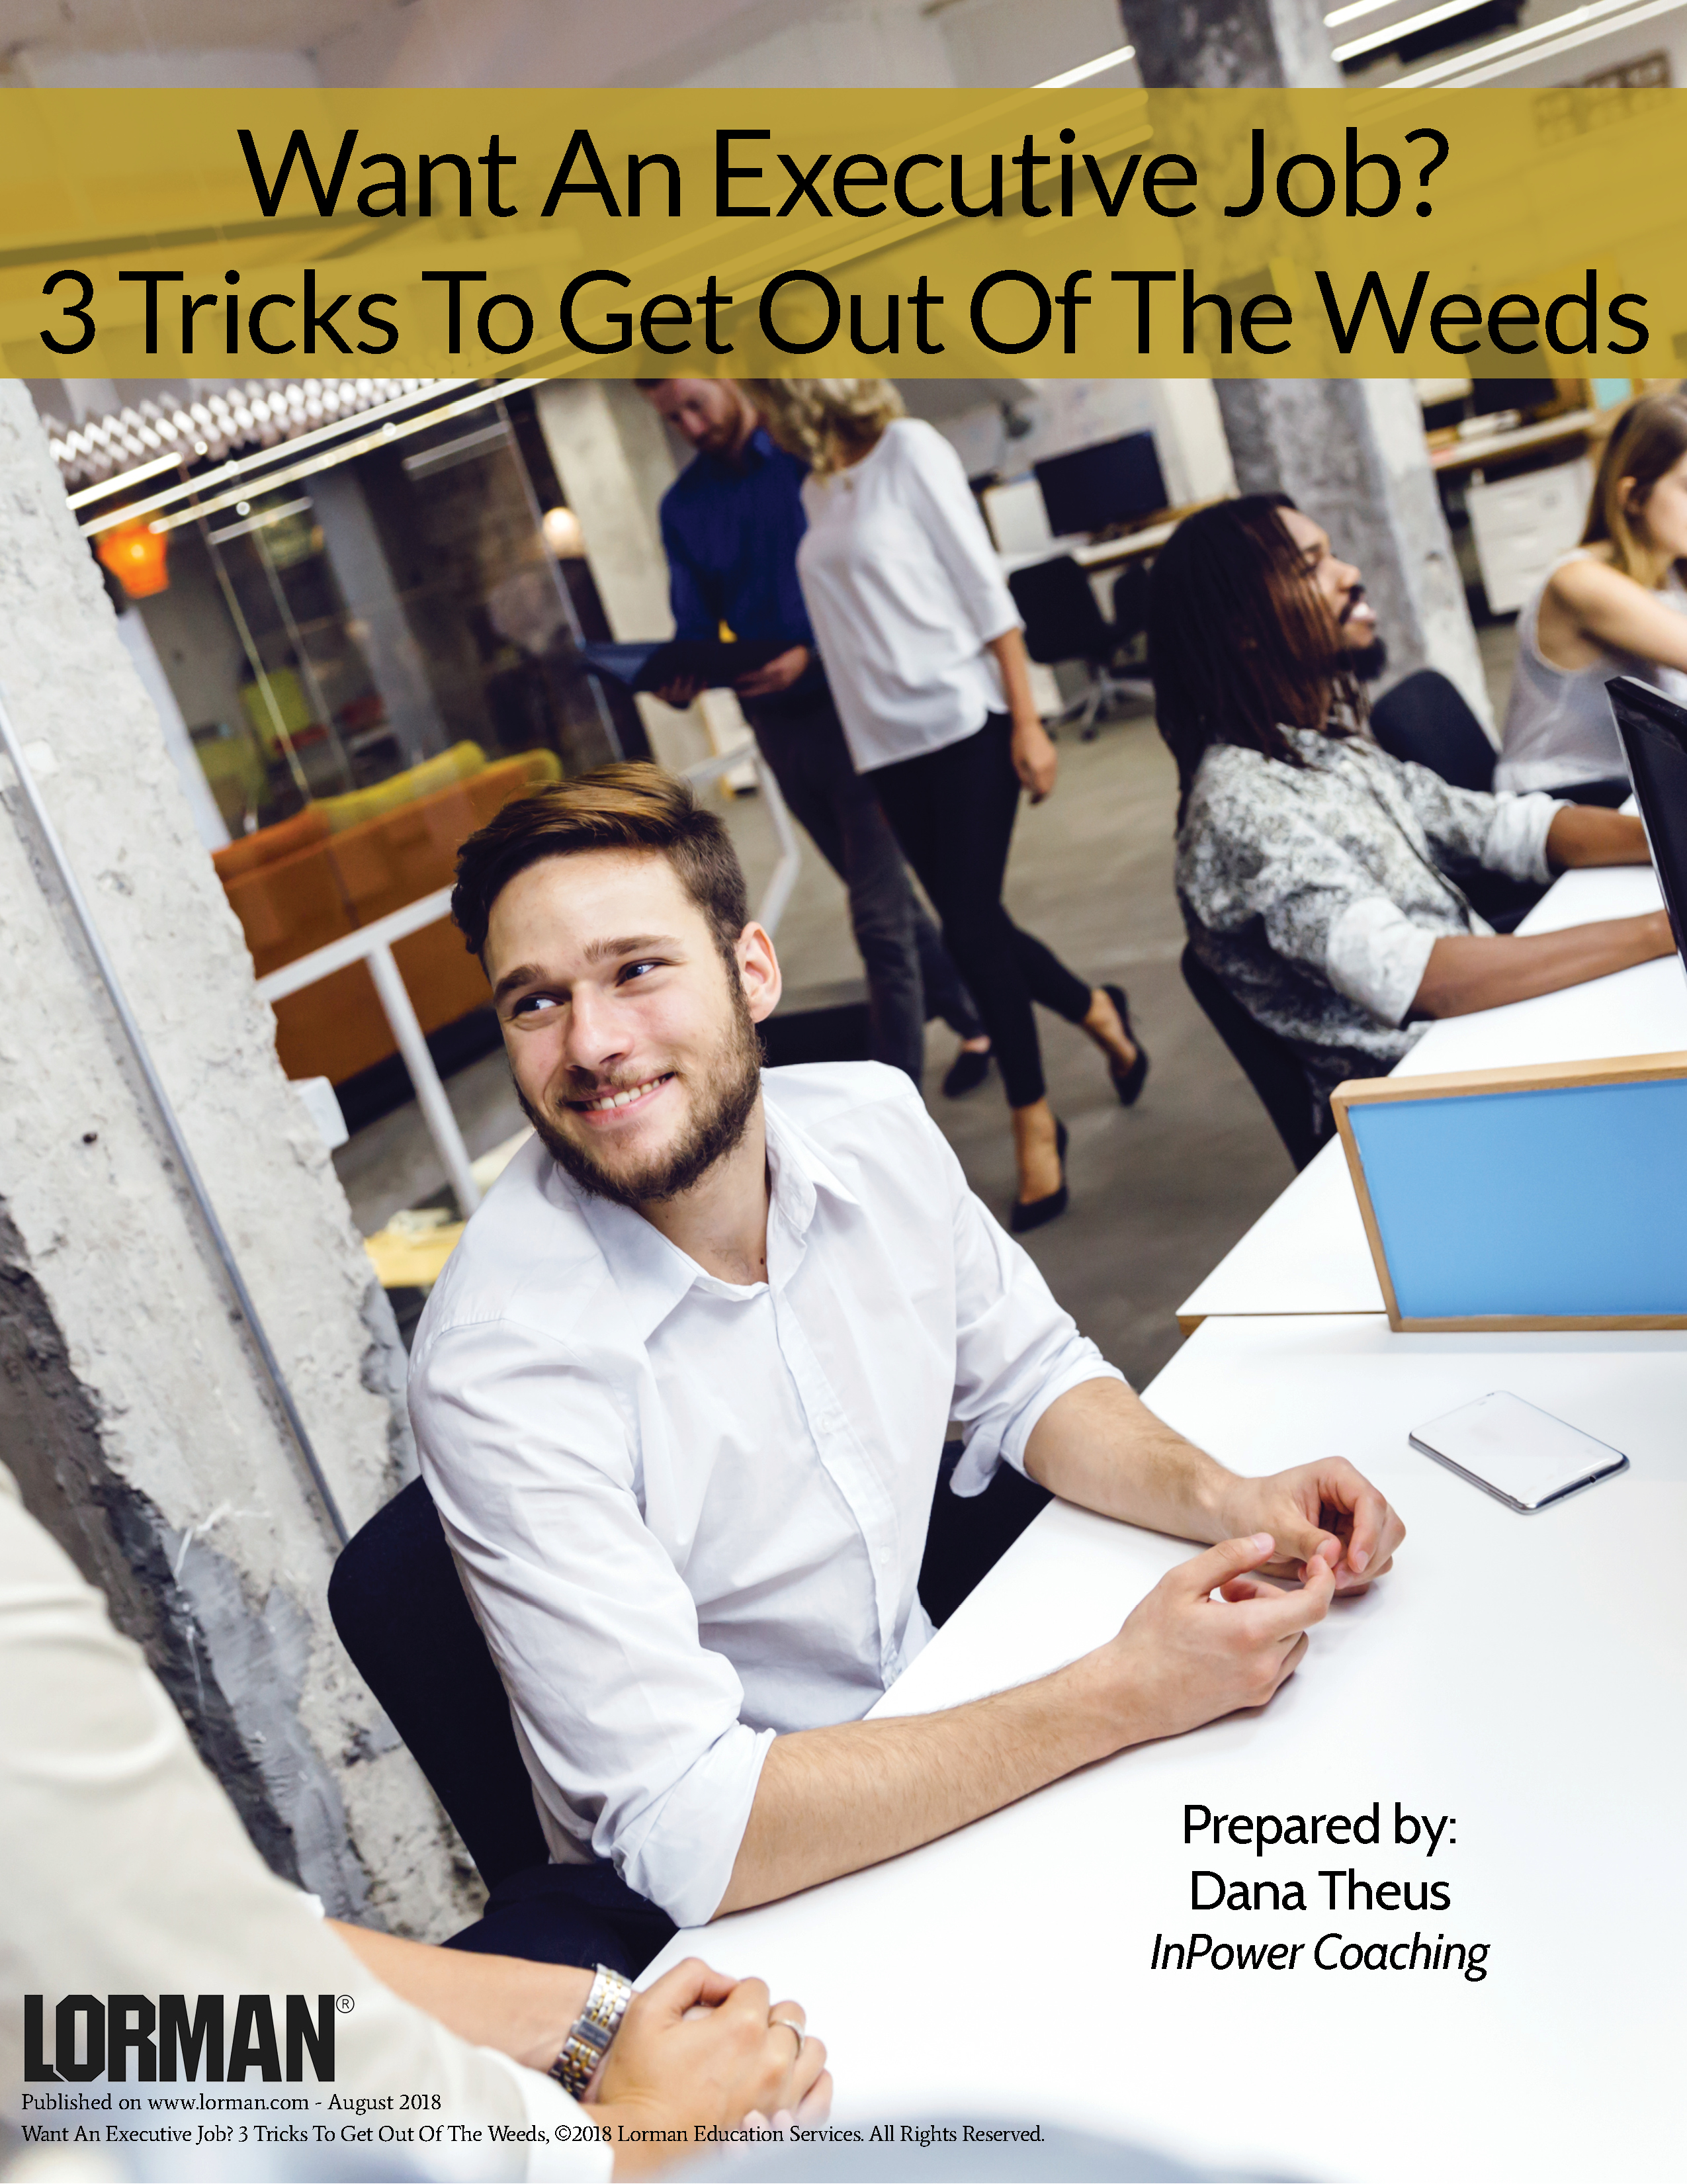 Want An Executive Job? 3 Tricks To Get Out Of The Weeds